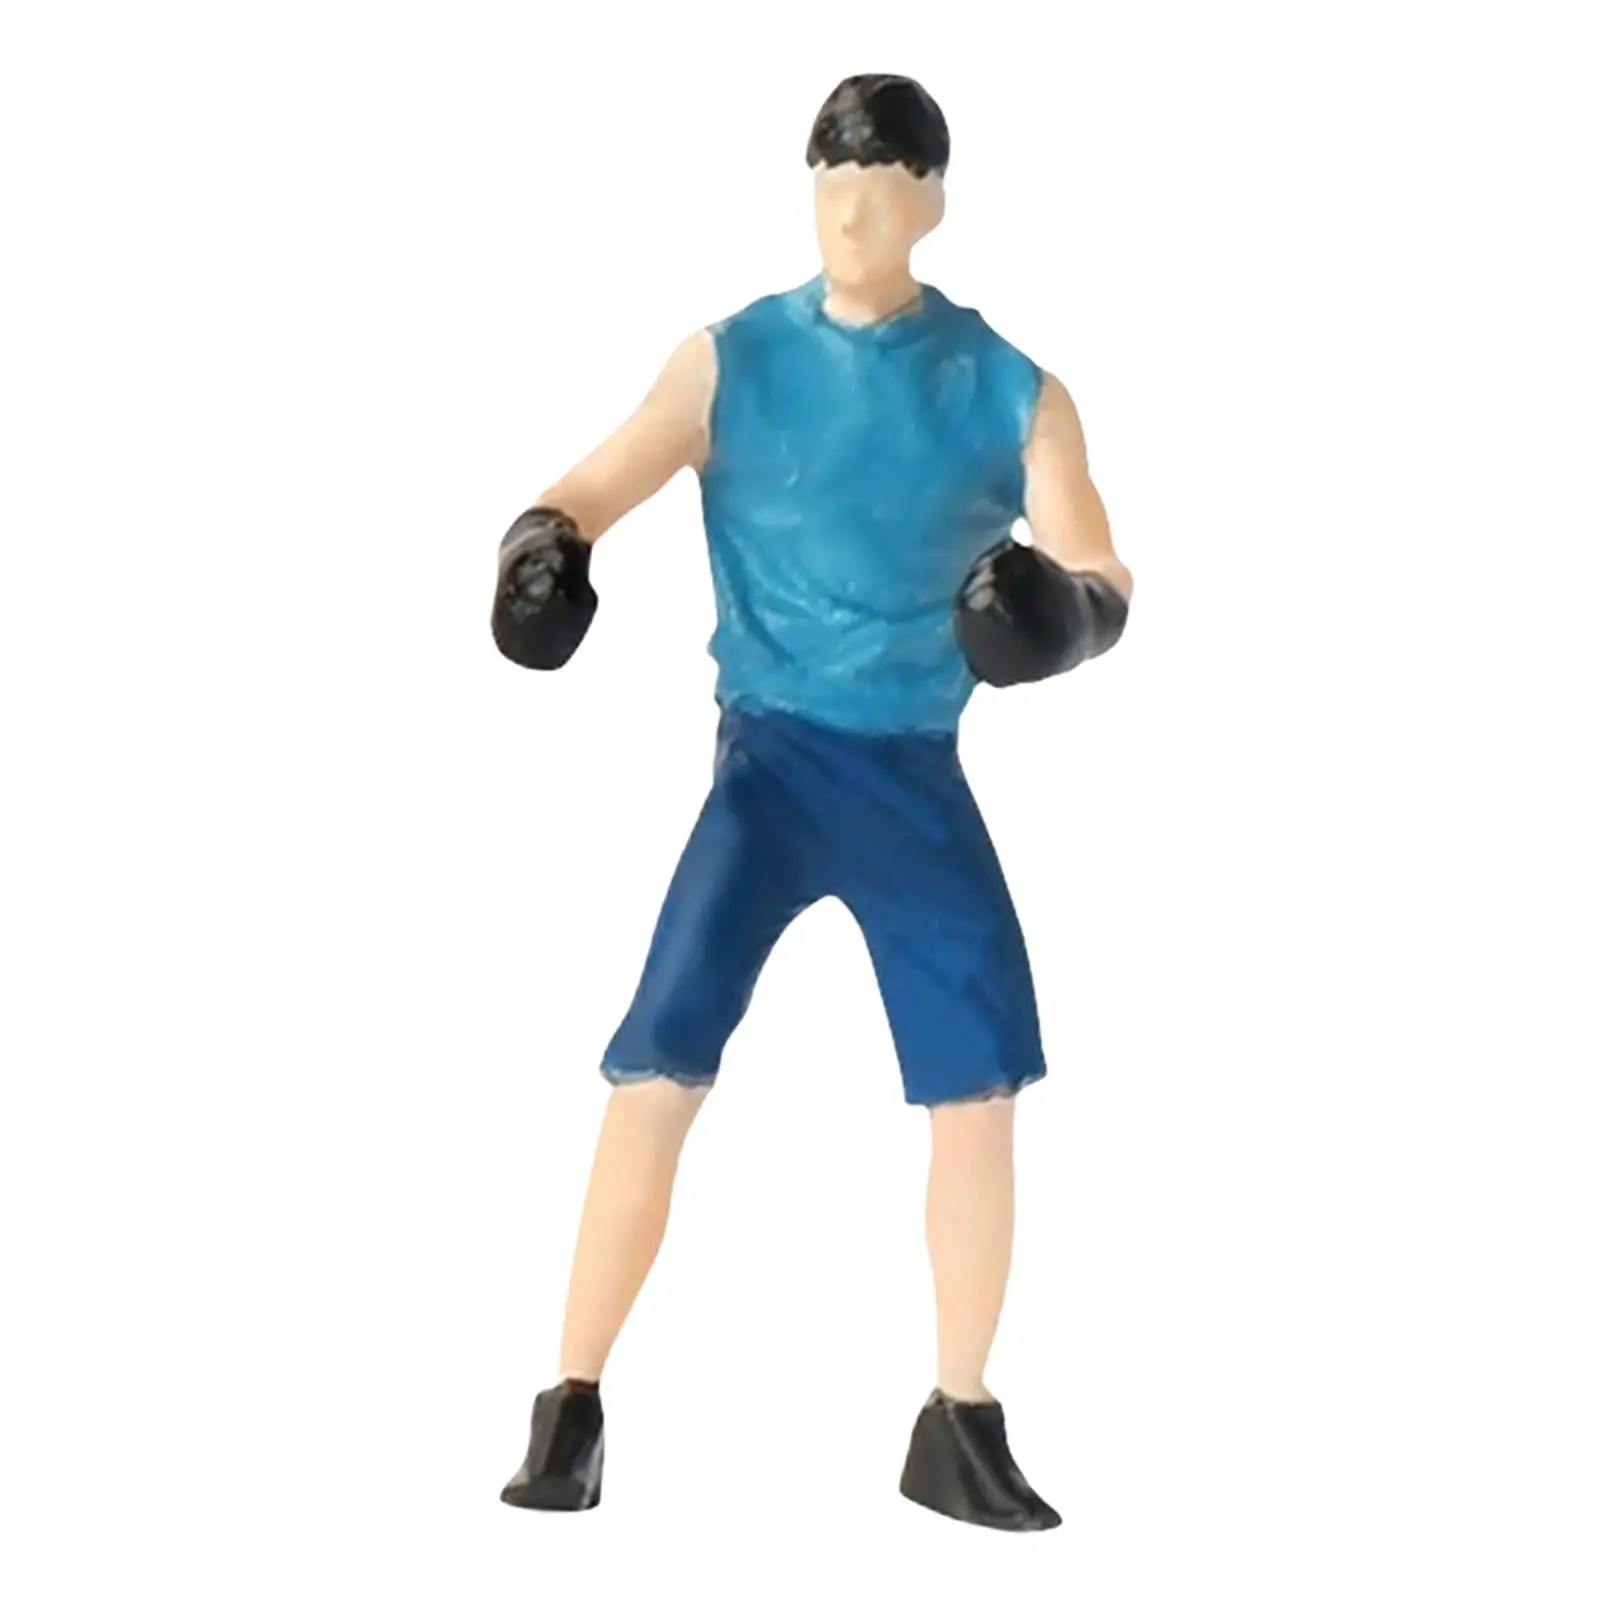 Mini 1:64 Figures Boxing Figurines Tiny People Desktop Decoration Ornaments for Layout